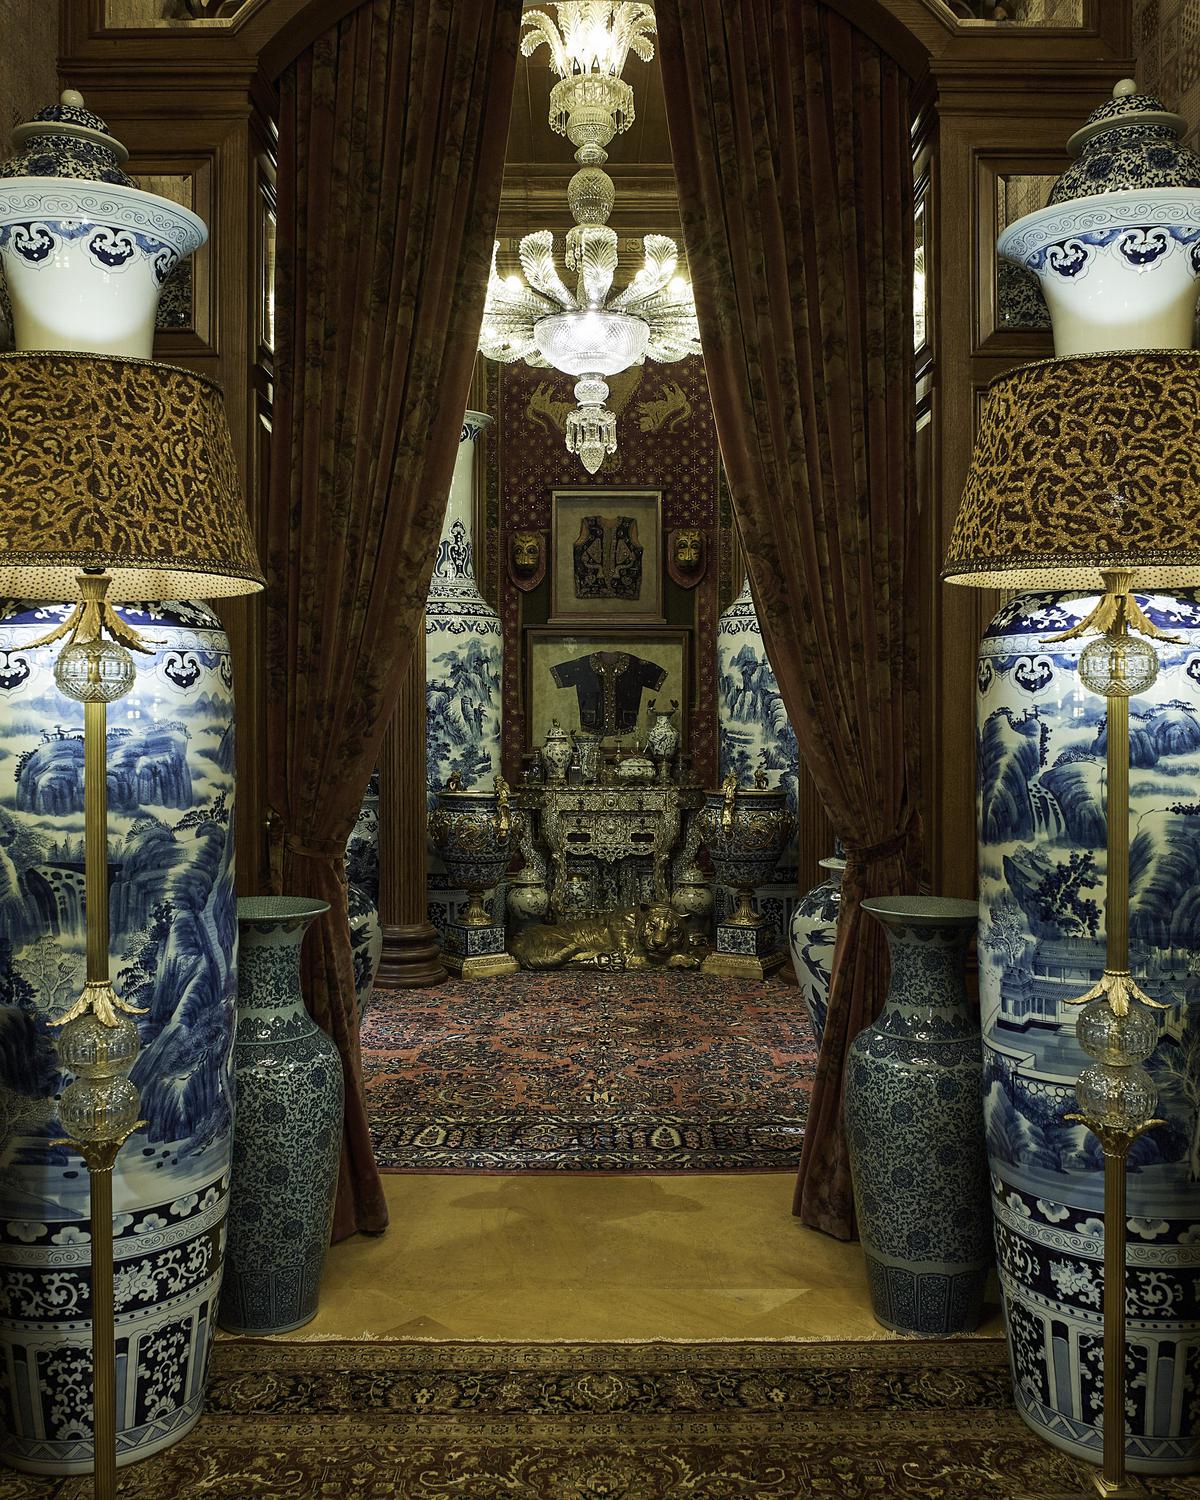 The Sabyasachi Mukherjee store is decorated with over 100 chandeliers, 275 carpets, 3,000 books, and 150 works of art